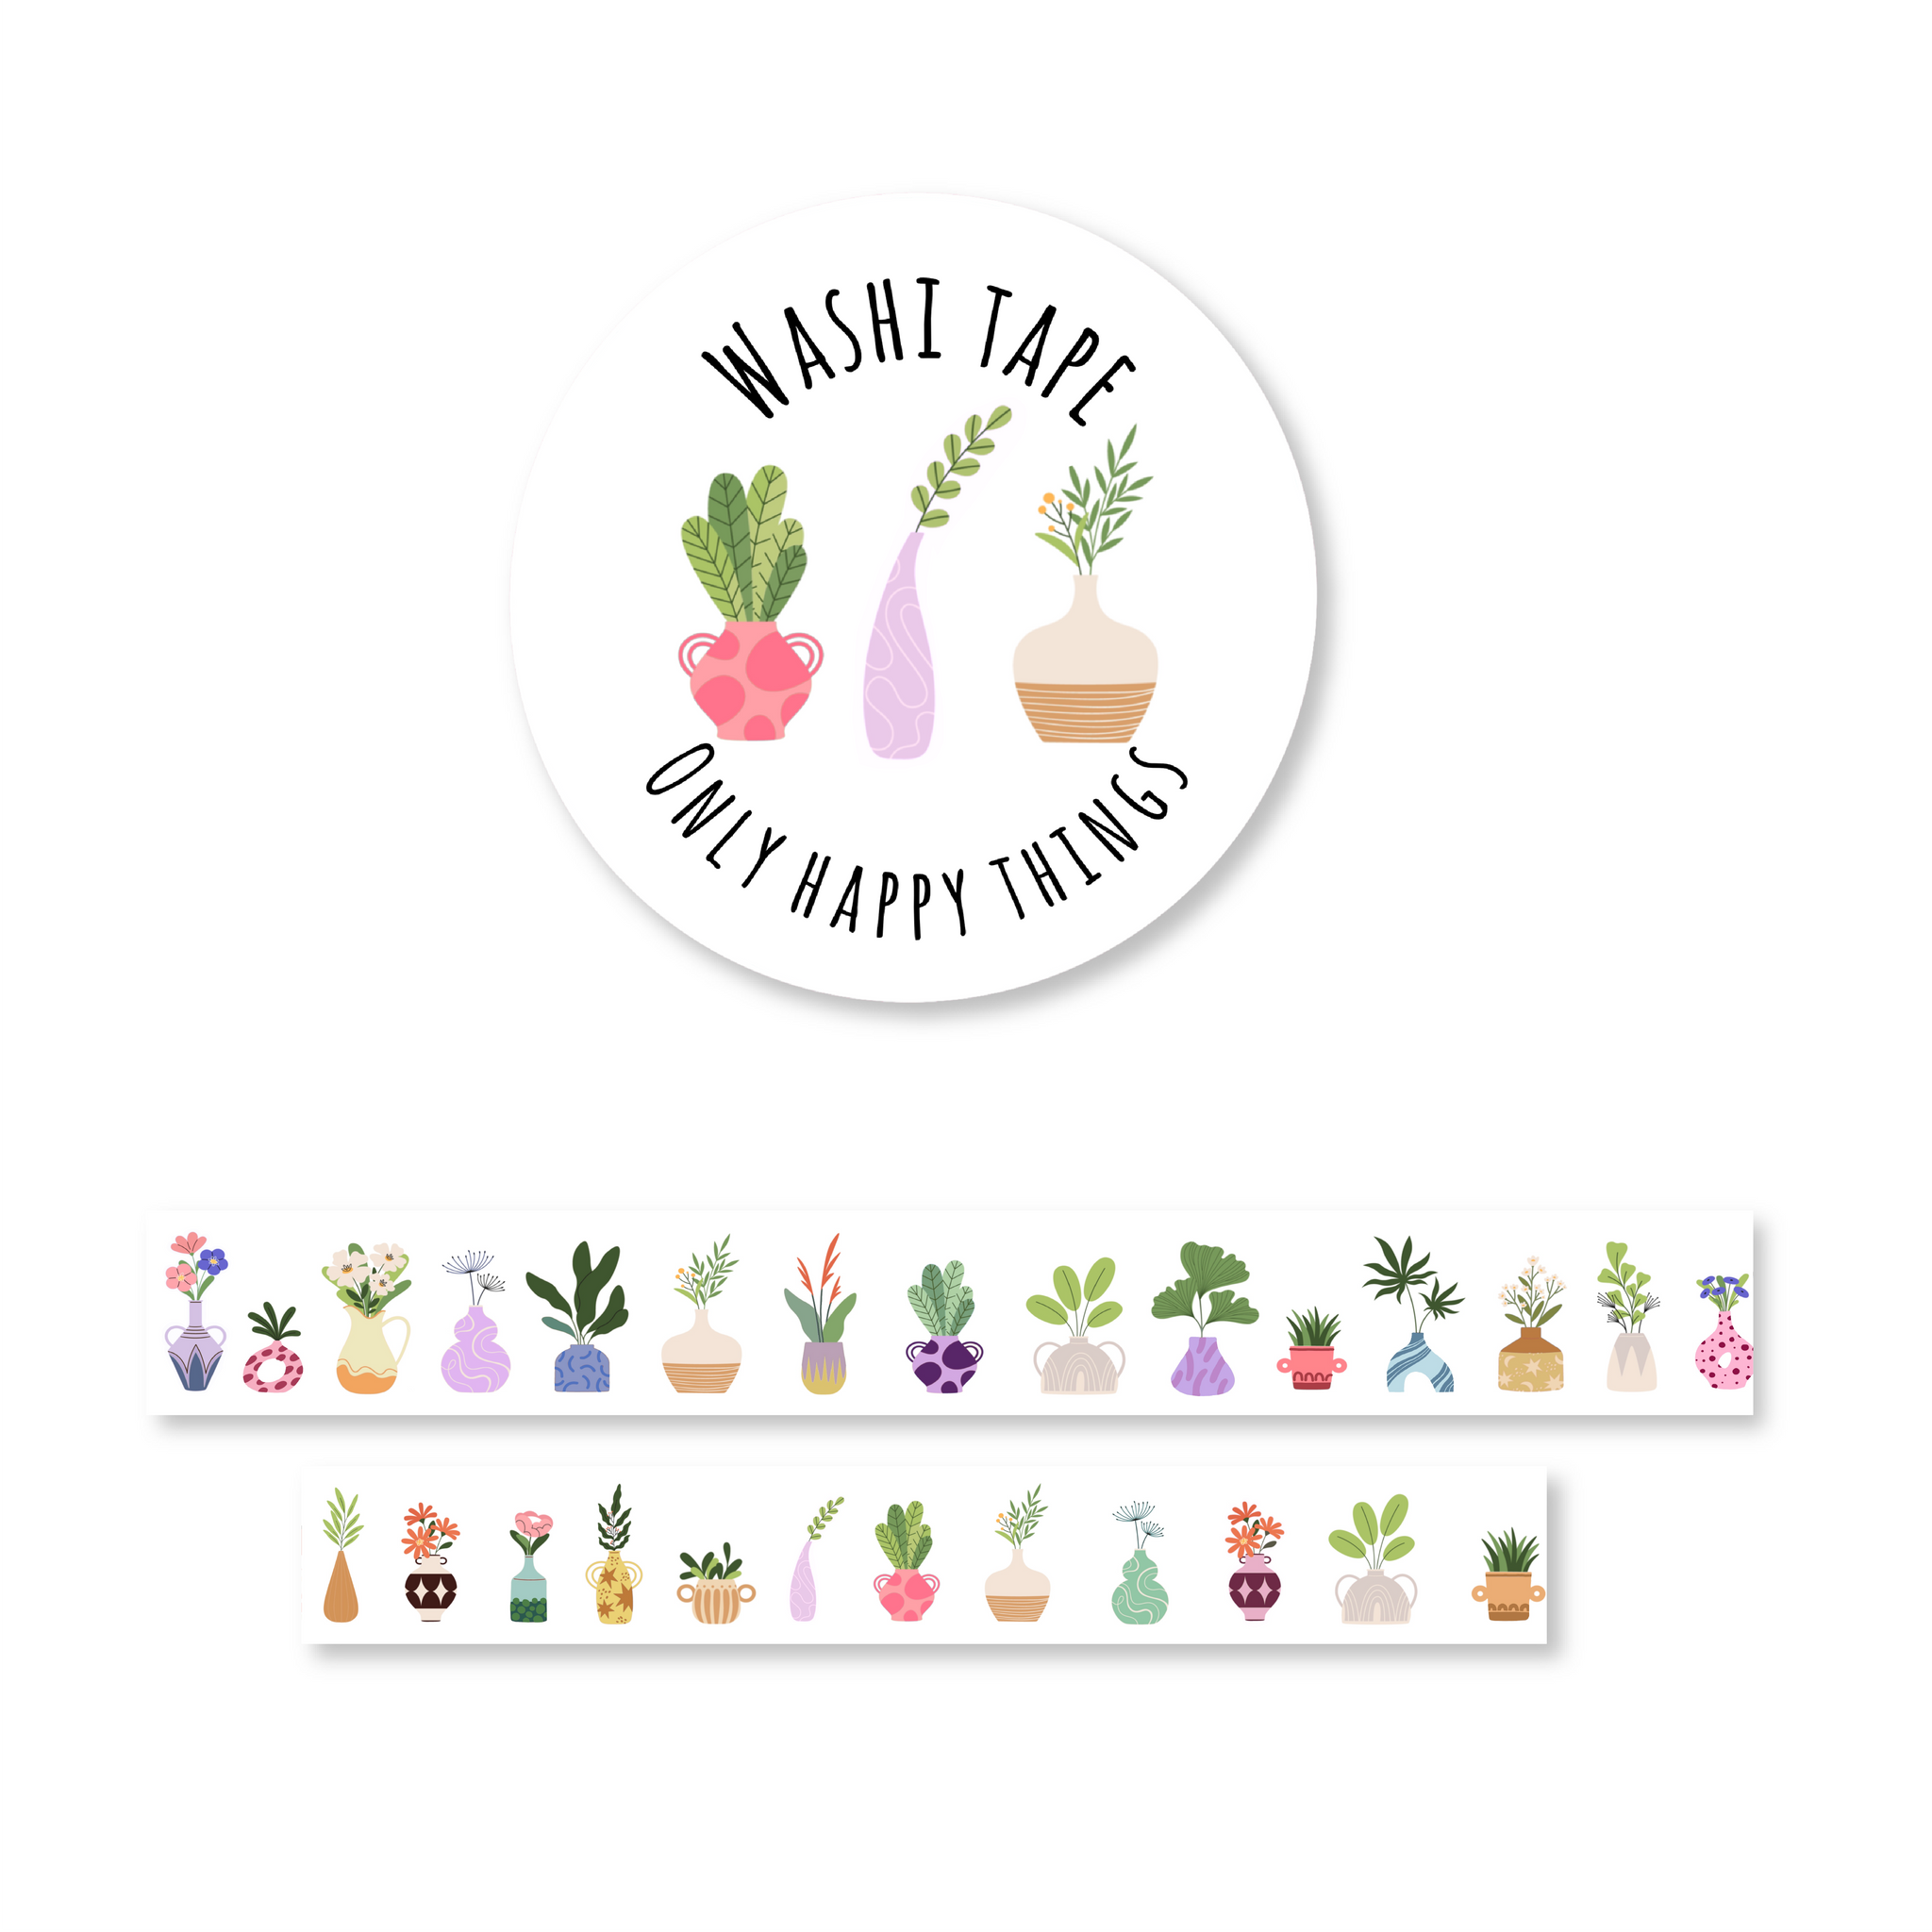 Vases with Flowers & Plants Washi Tape